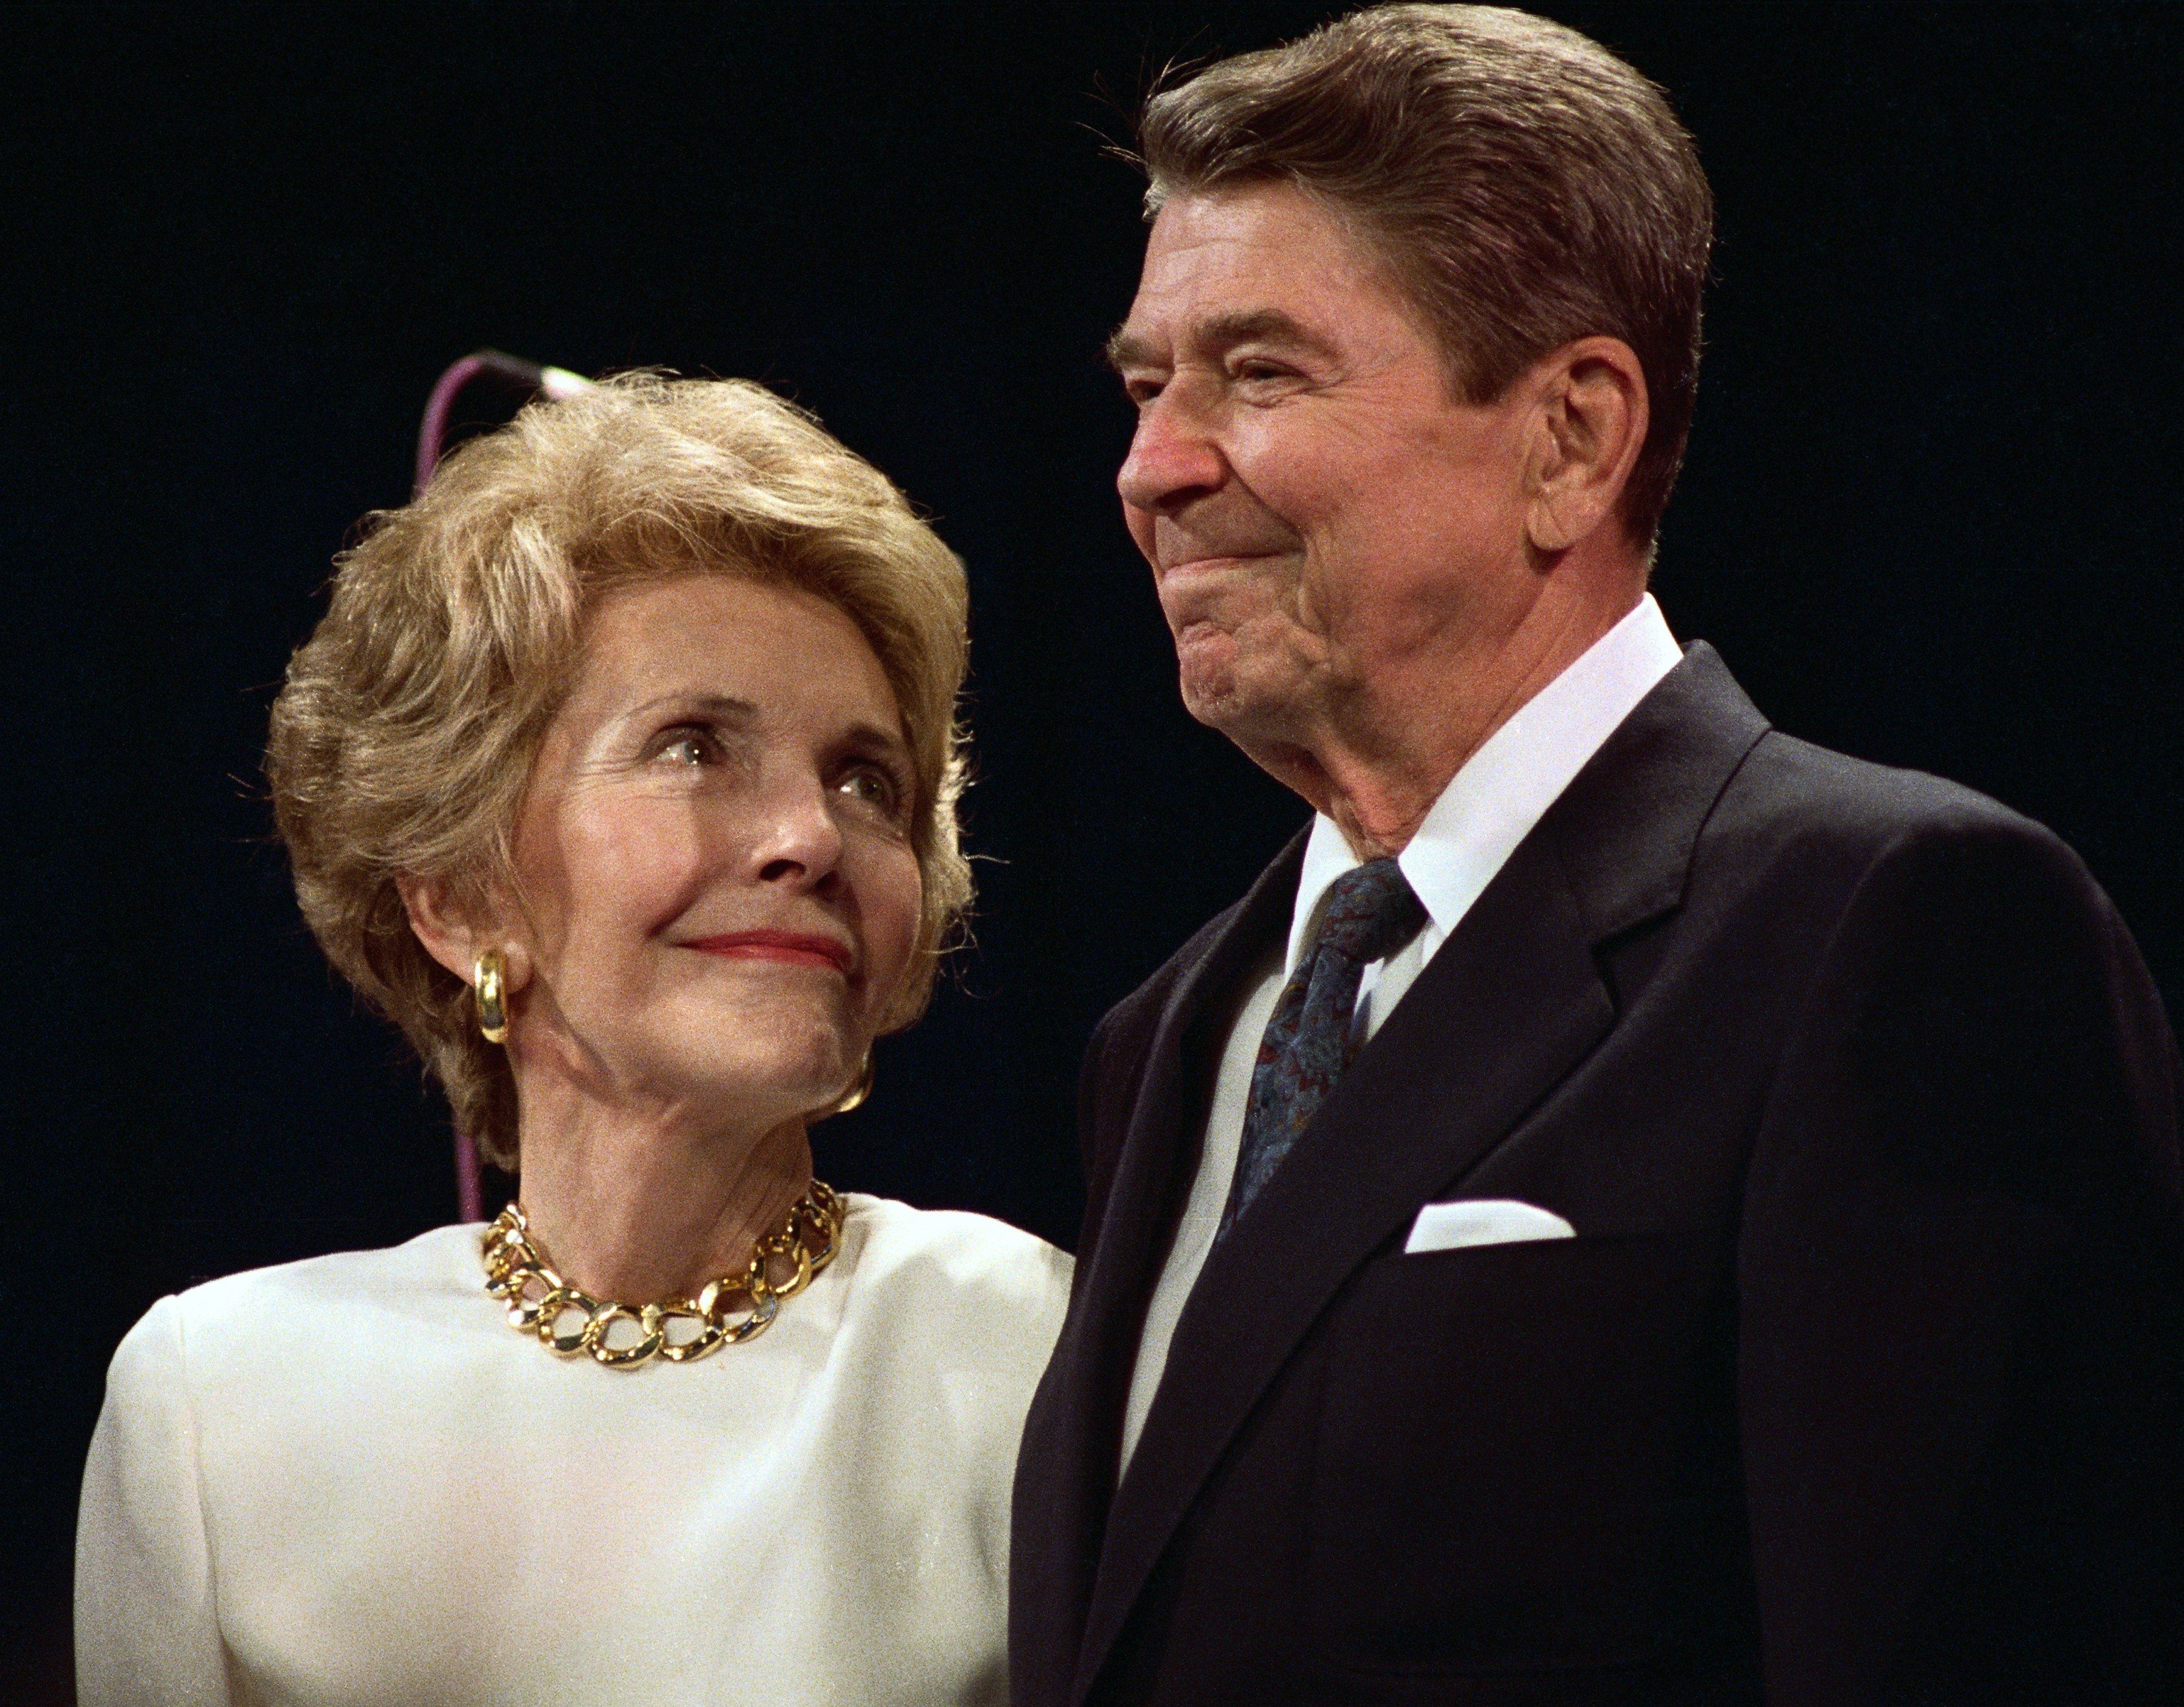 Nancy Reagan and Ronald Reagan with a black background